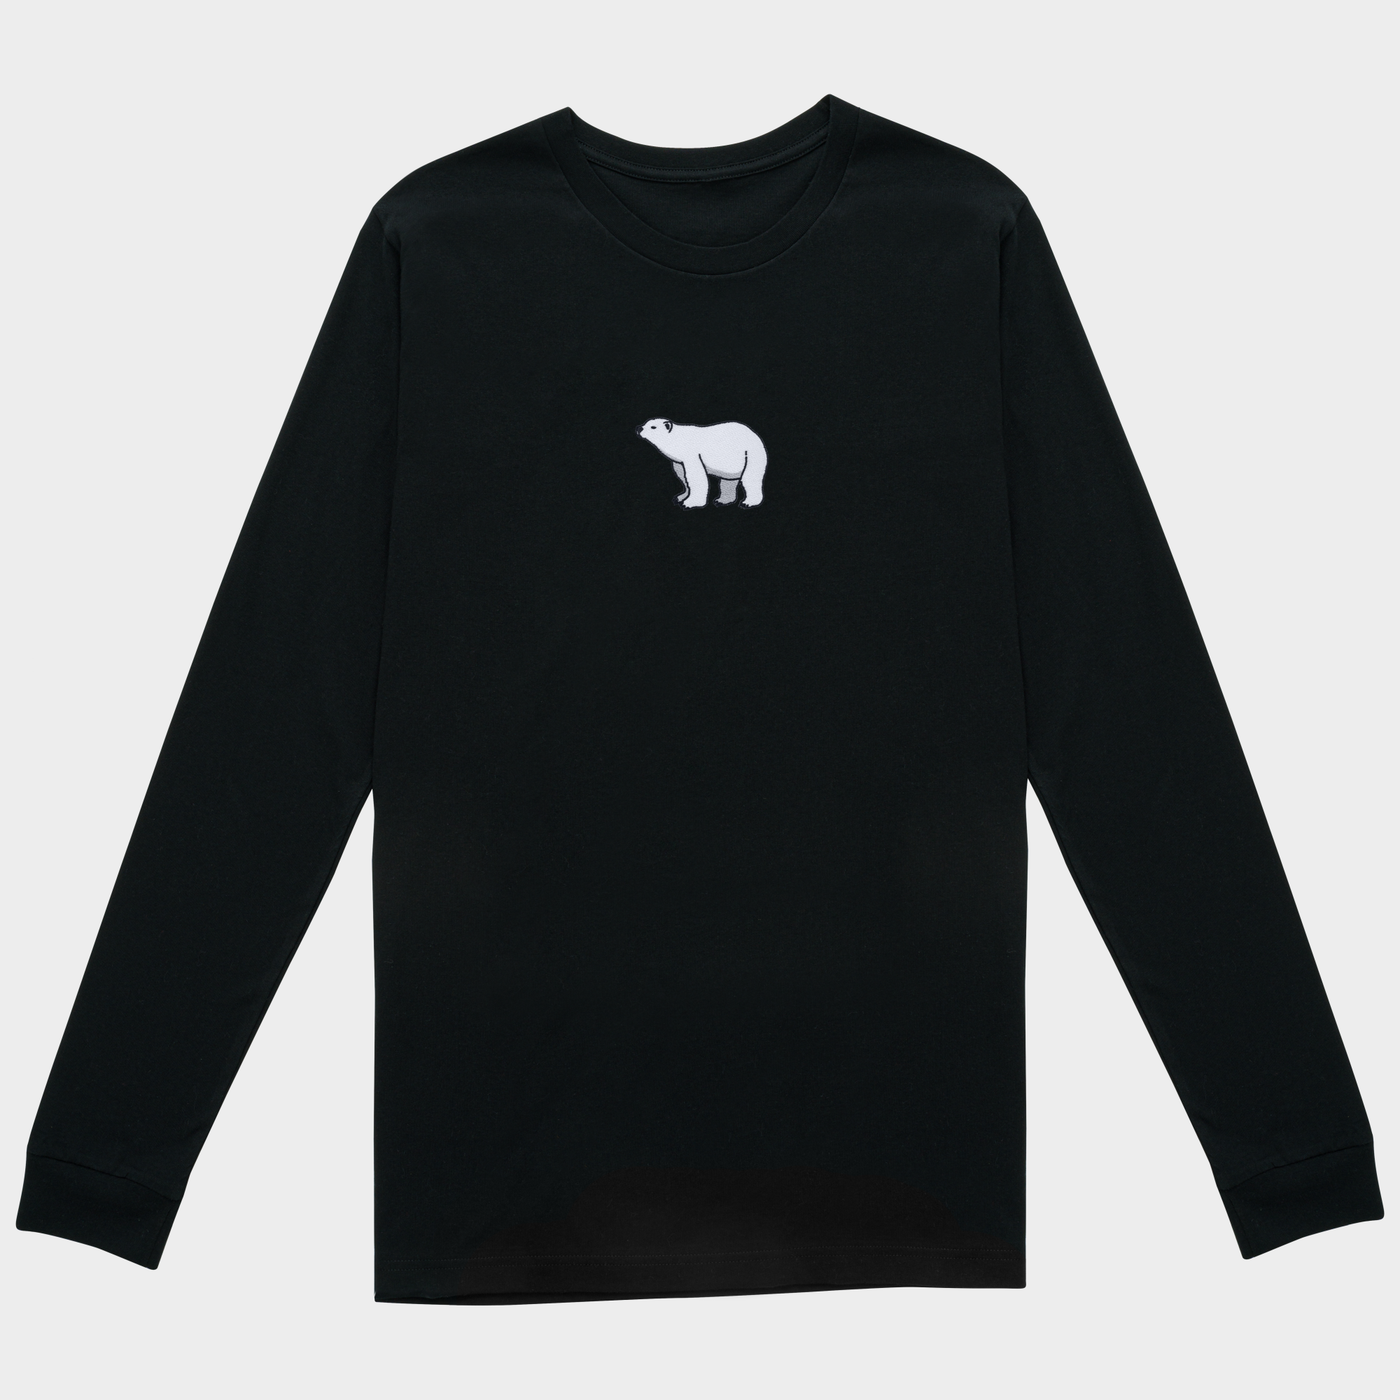 Bobby's Planet Men's Embroidered Polar Bear Long Sleeve Shirt from Arctic Polar Animals Collection in Black Color#color_black